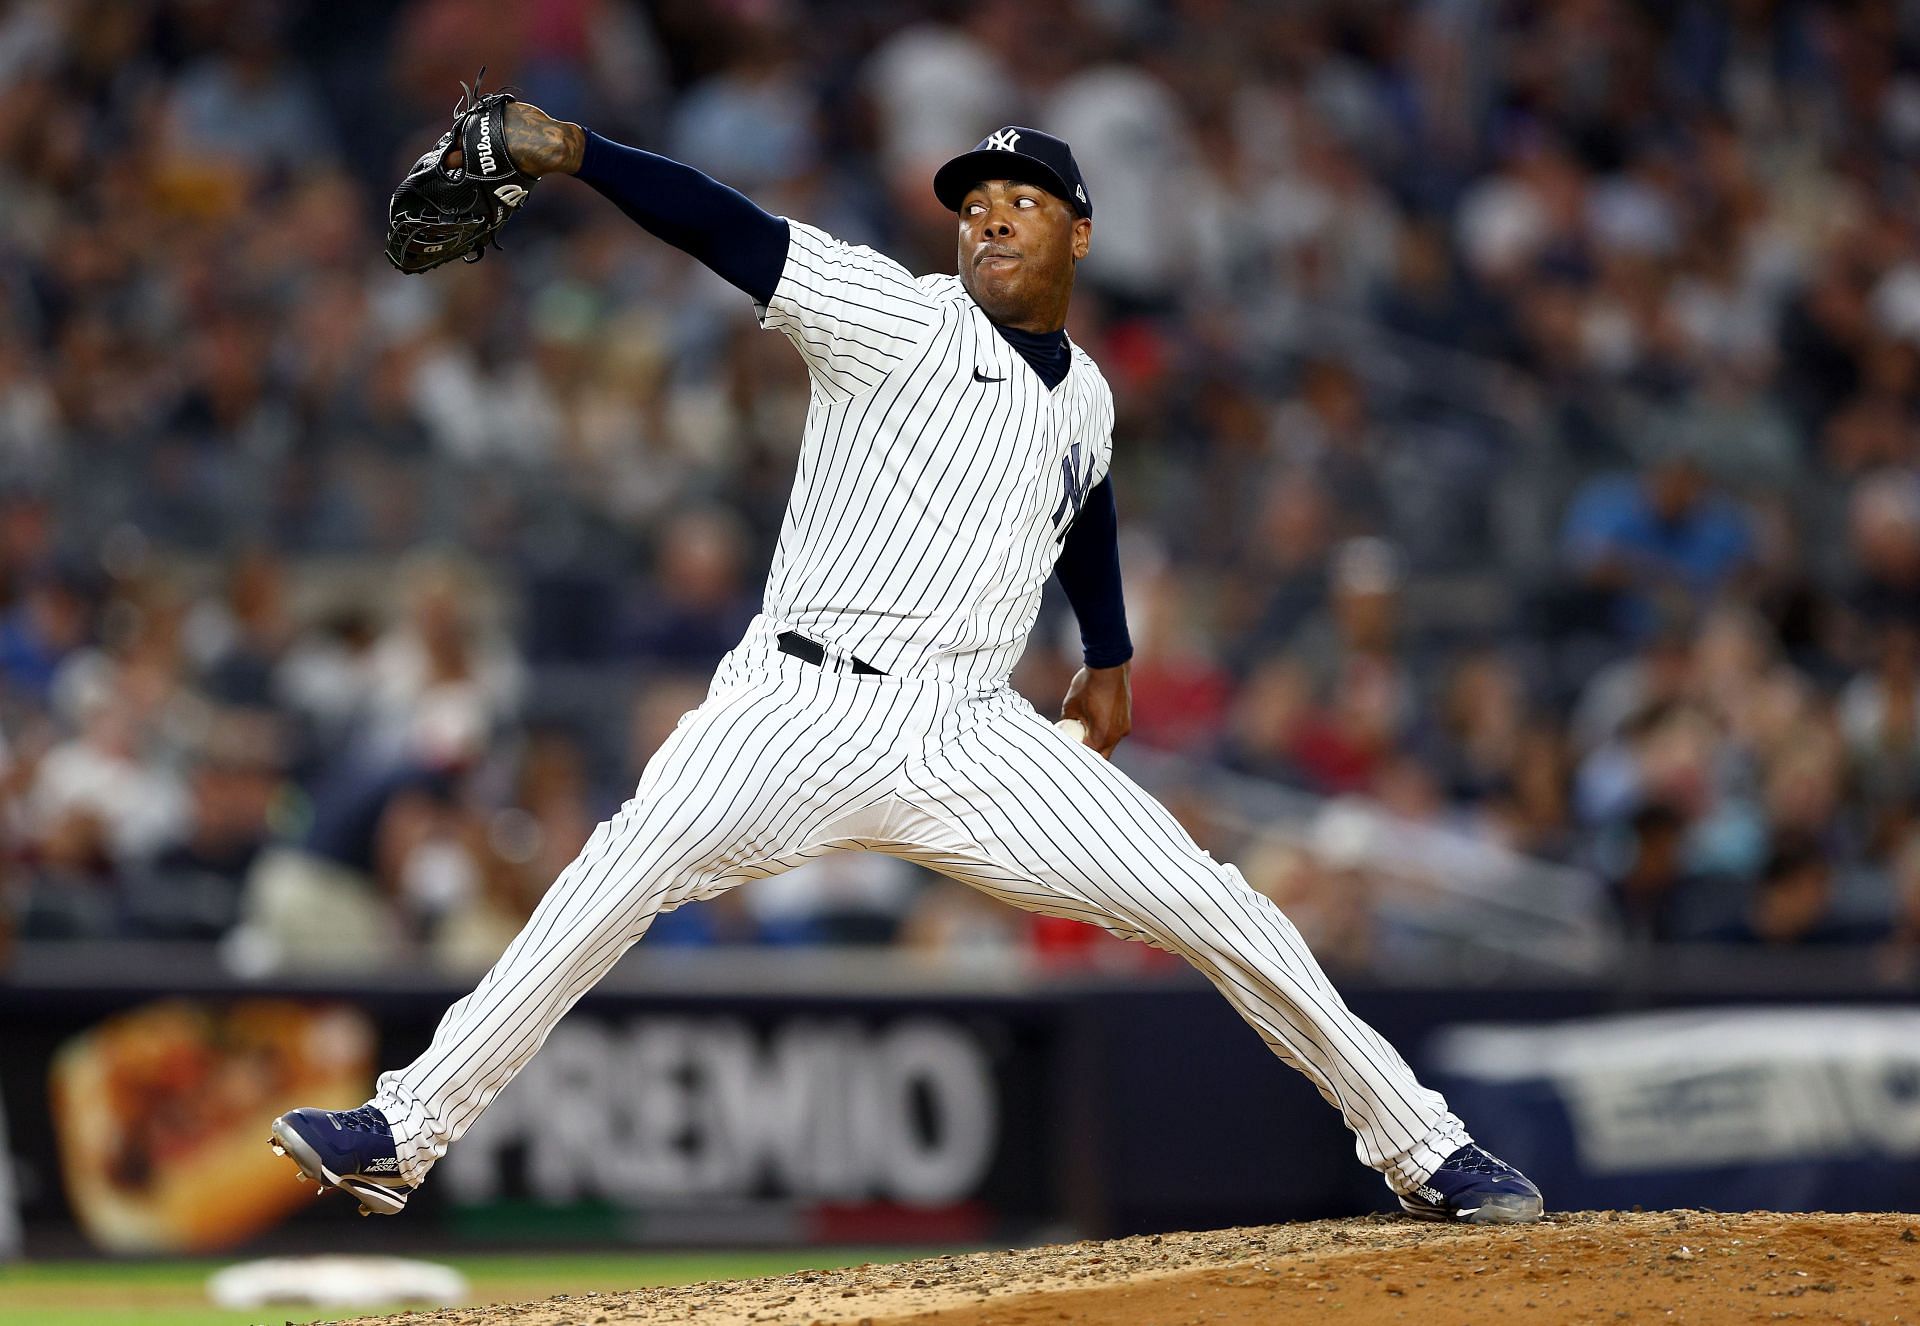 MLB fans react to Aroldis Chapman being on Great Britain's